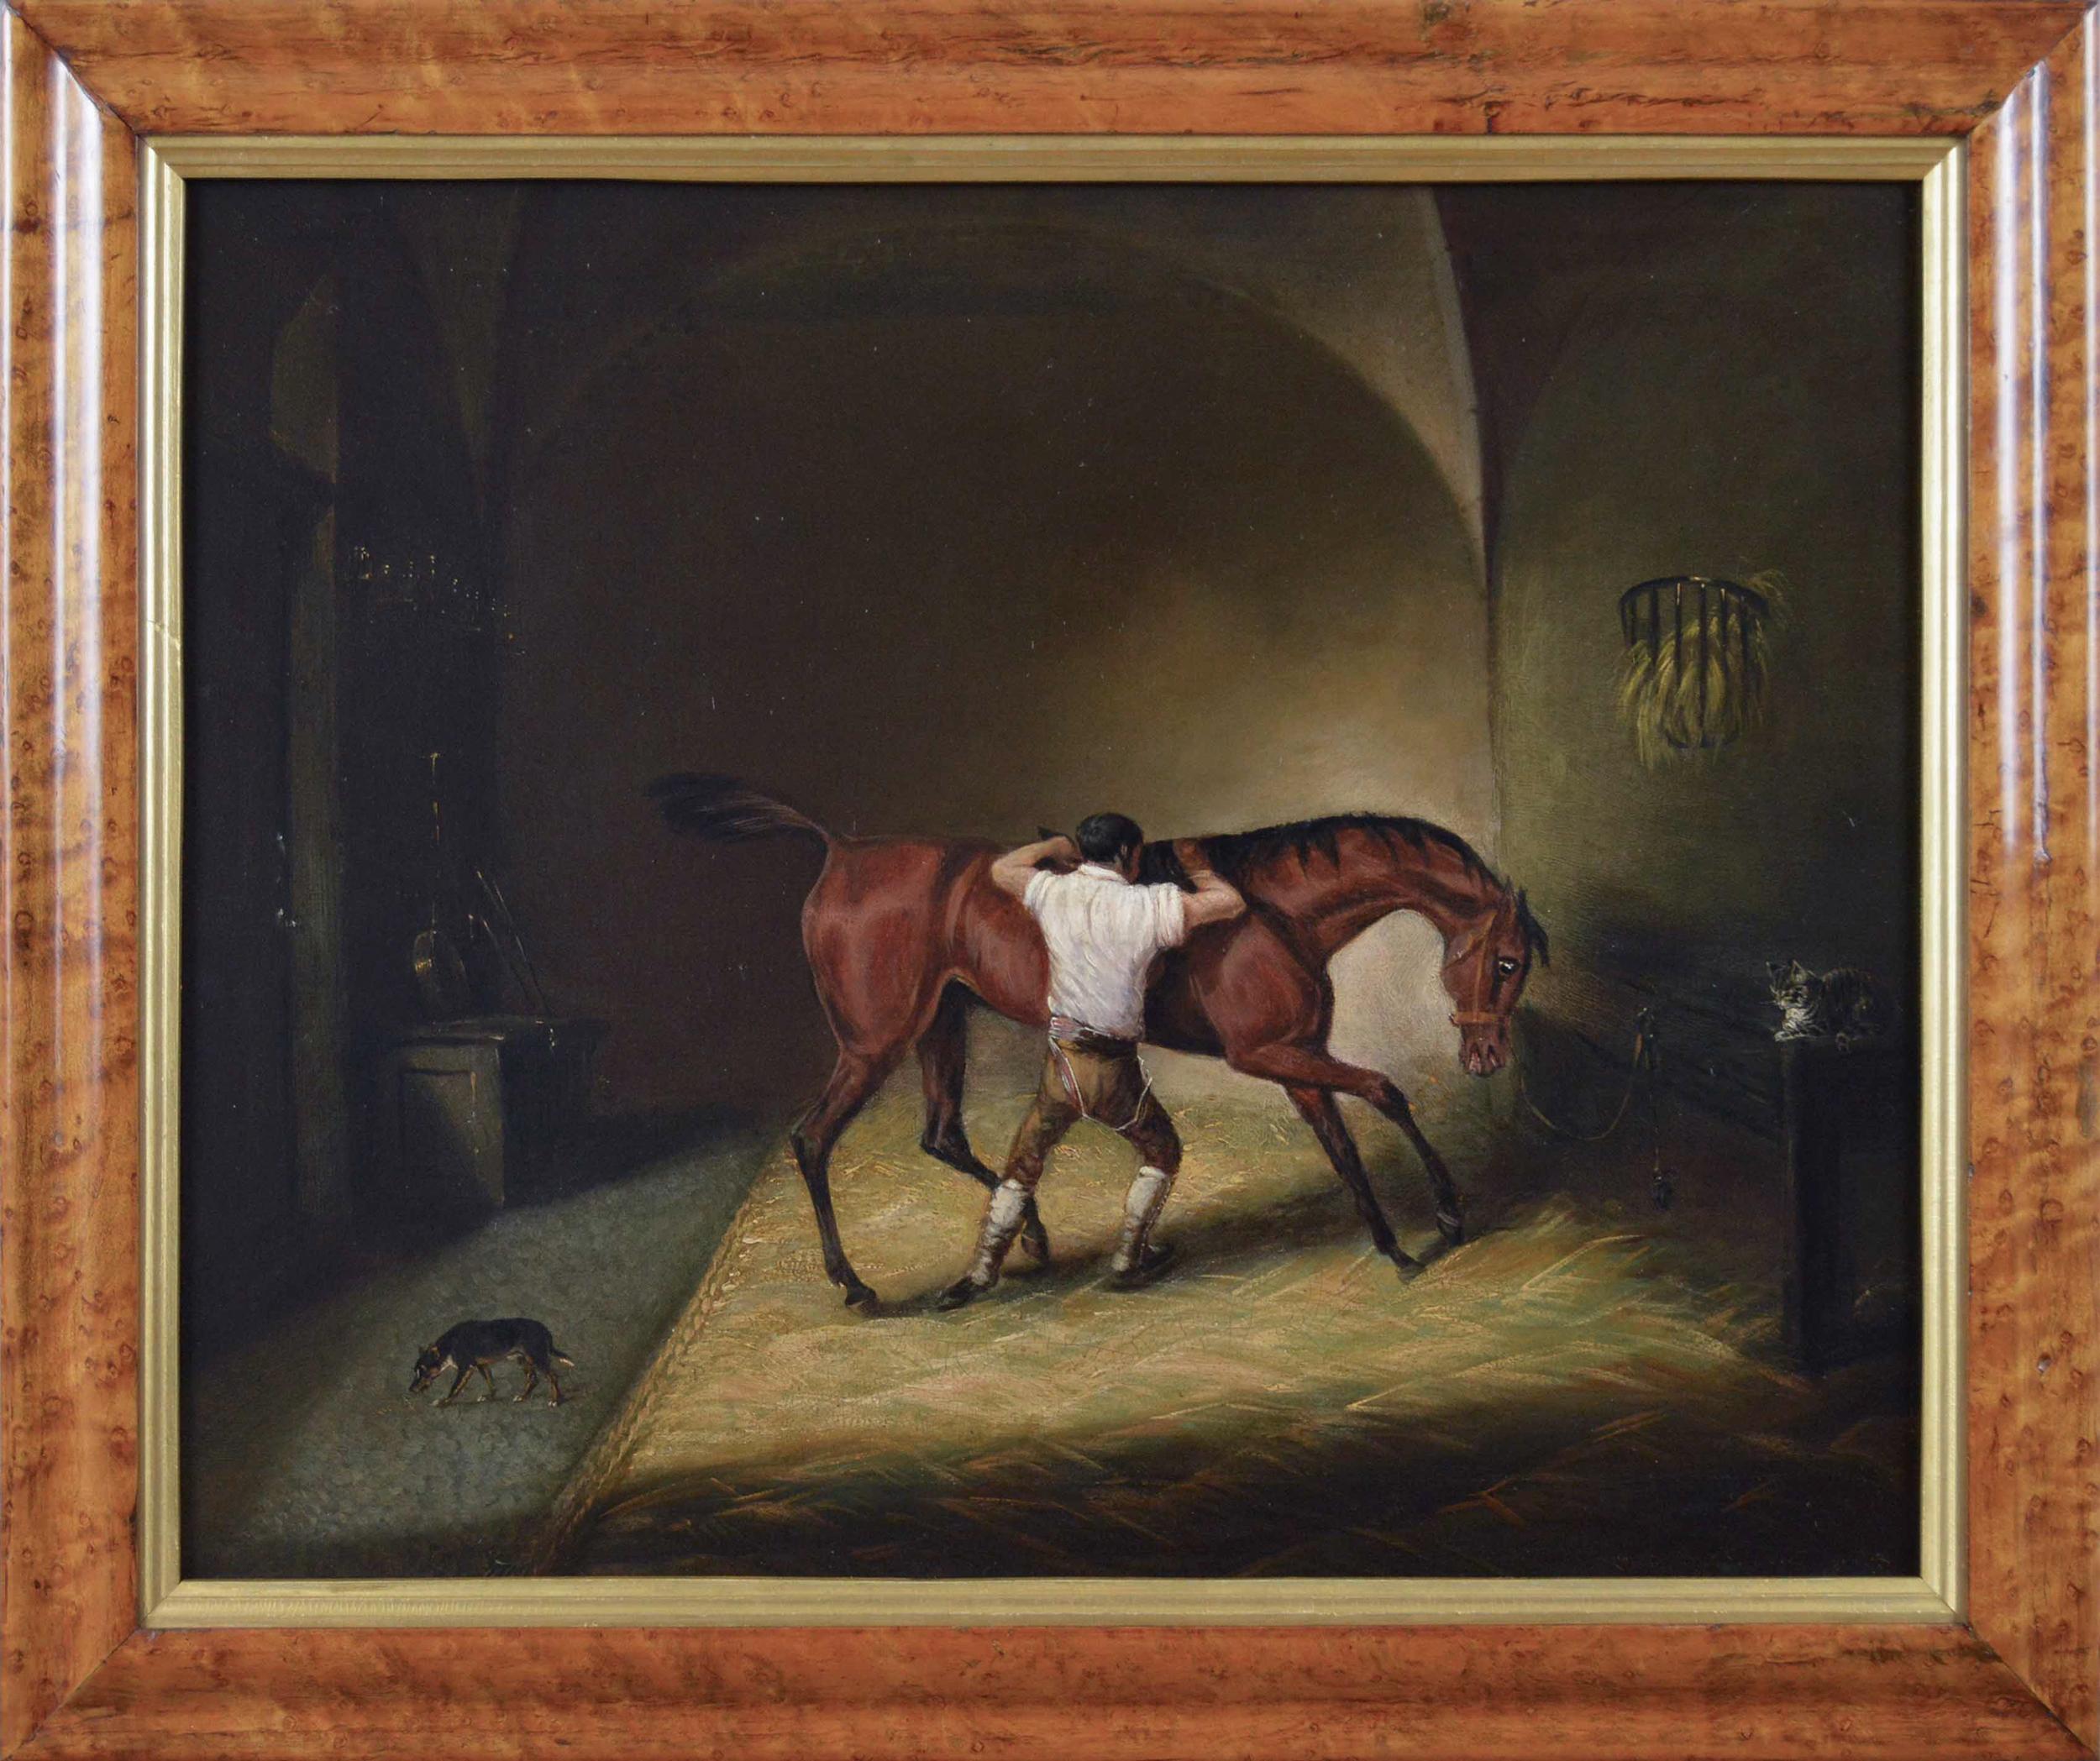 19th Century sporting animal oil painting of a horse & groom in a stable